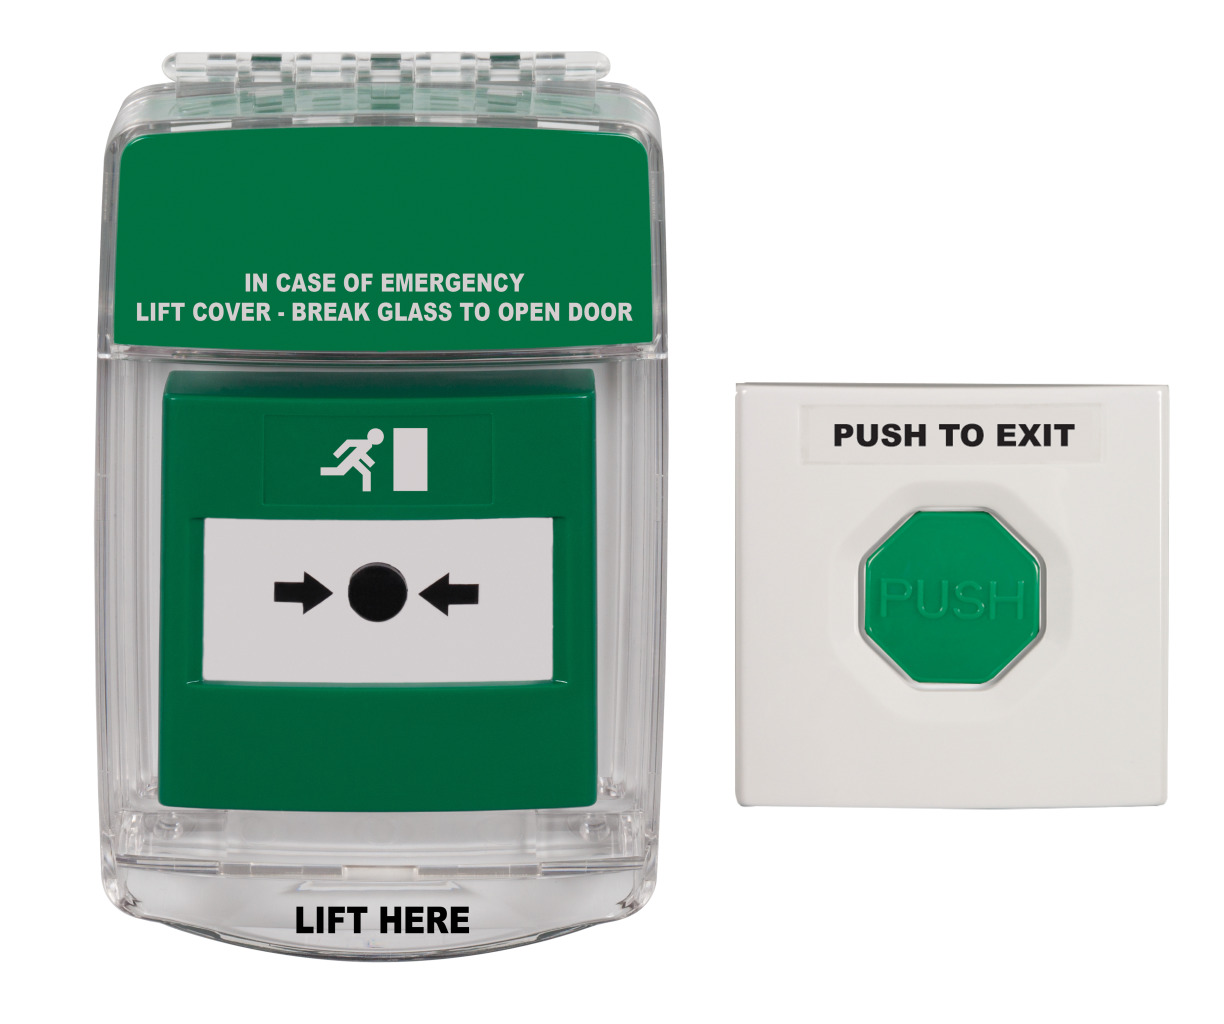 Break Glass Fire Lift - Assembly EE41 Disabled Fire Exit Push Bar/Pad Turn to Open Right Sticker/Self Adhesive Sign